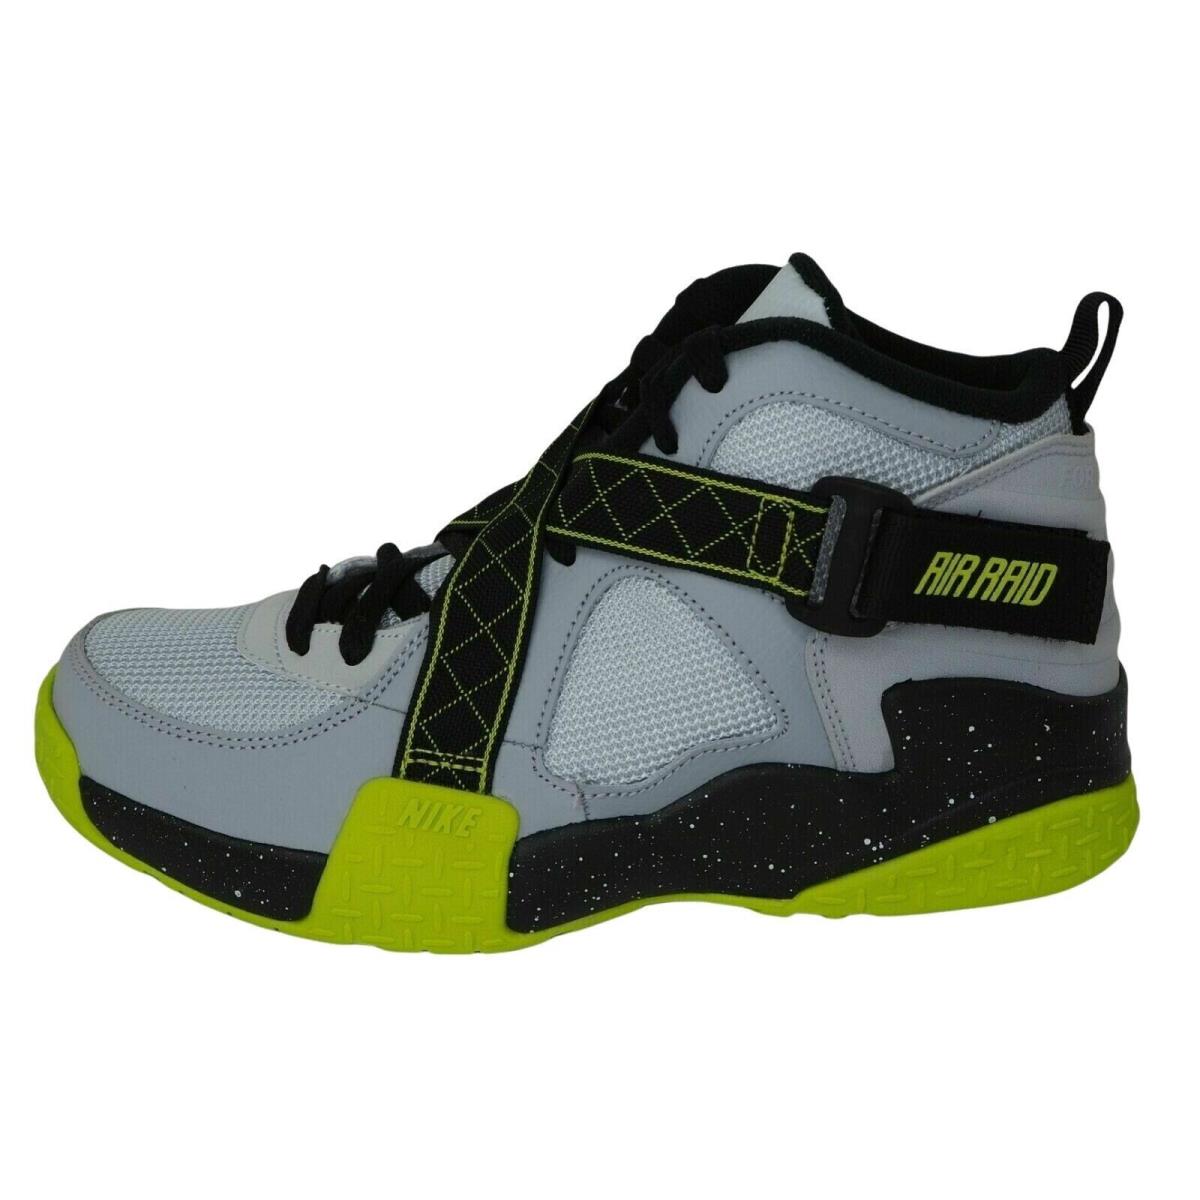 Nike Air Raid GS Boys Shoes Basketball 644412 002 Sneakers Wolf Grey Leather 5.5 - Gray